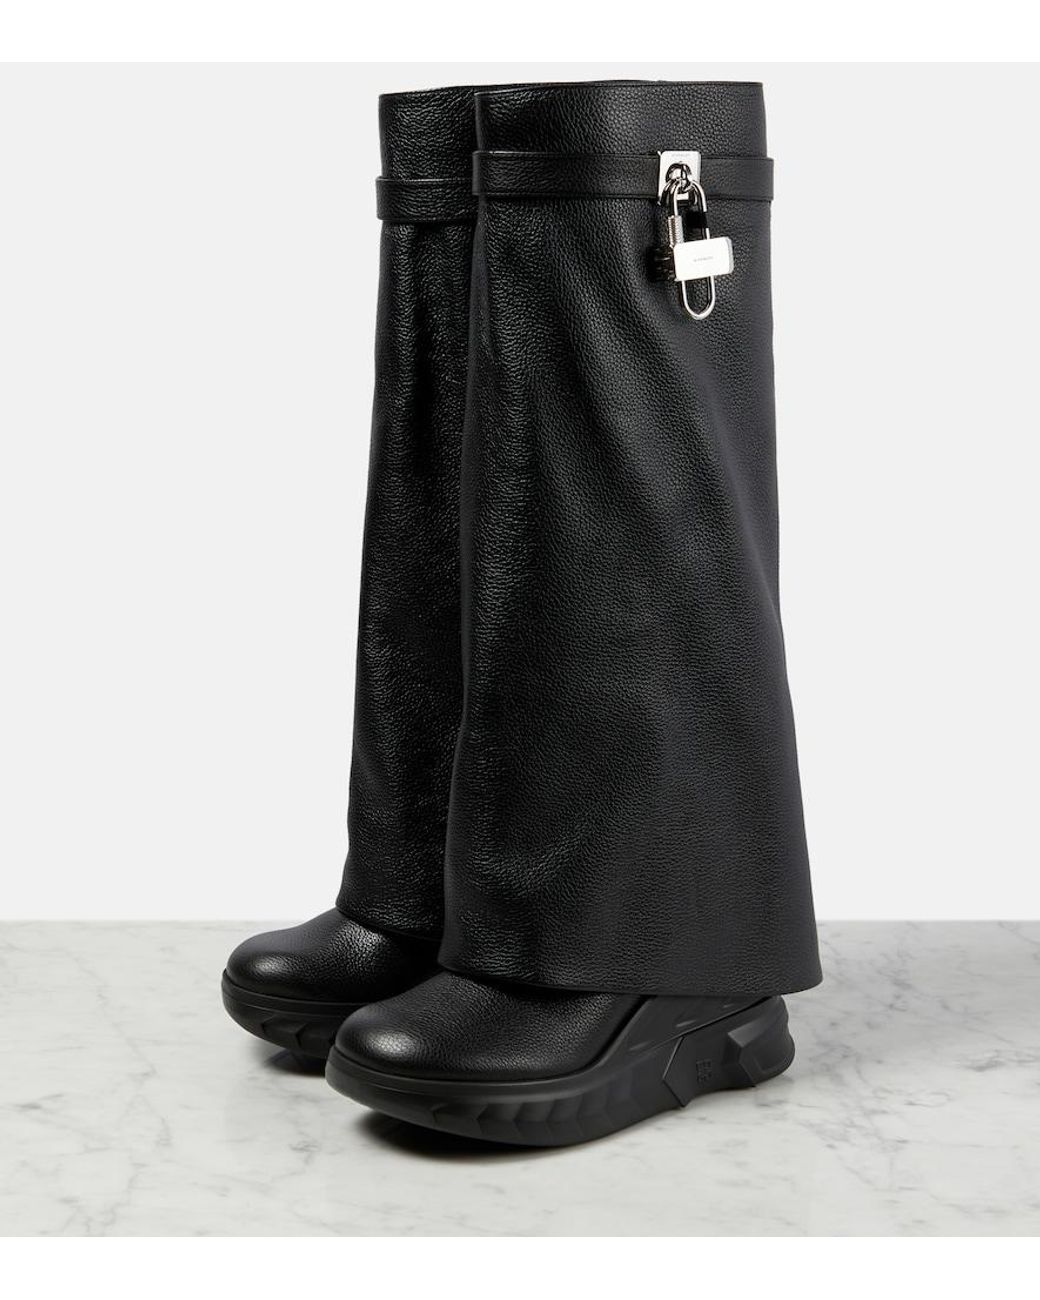 Givenchy Shark Lock Biker Leather Knee-high Boots in Black | Lyst